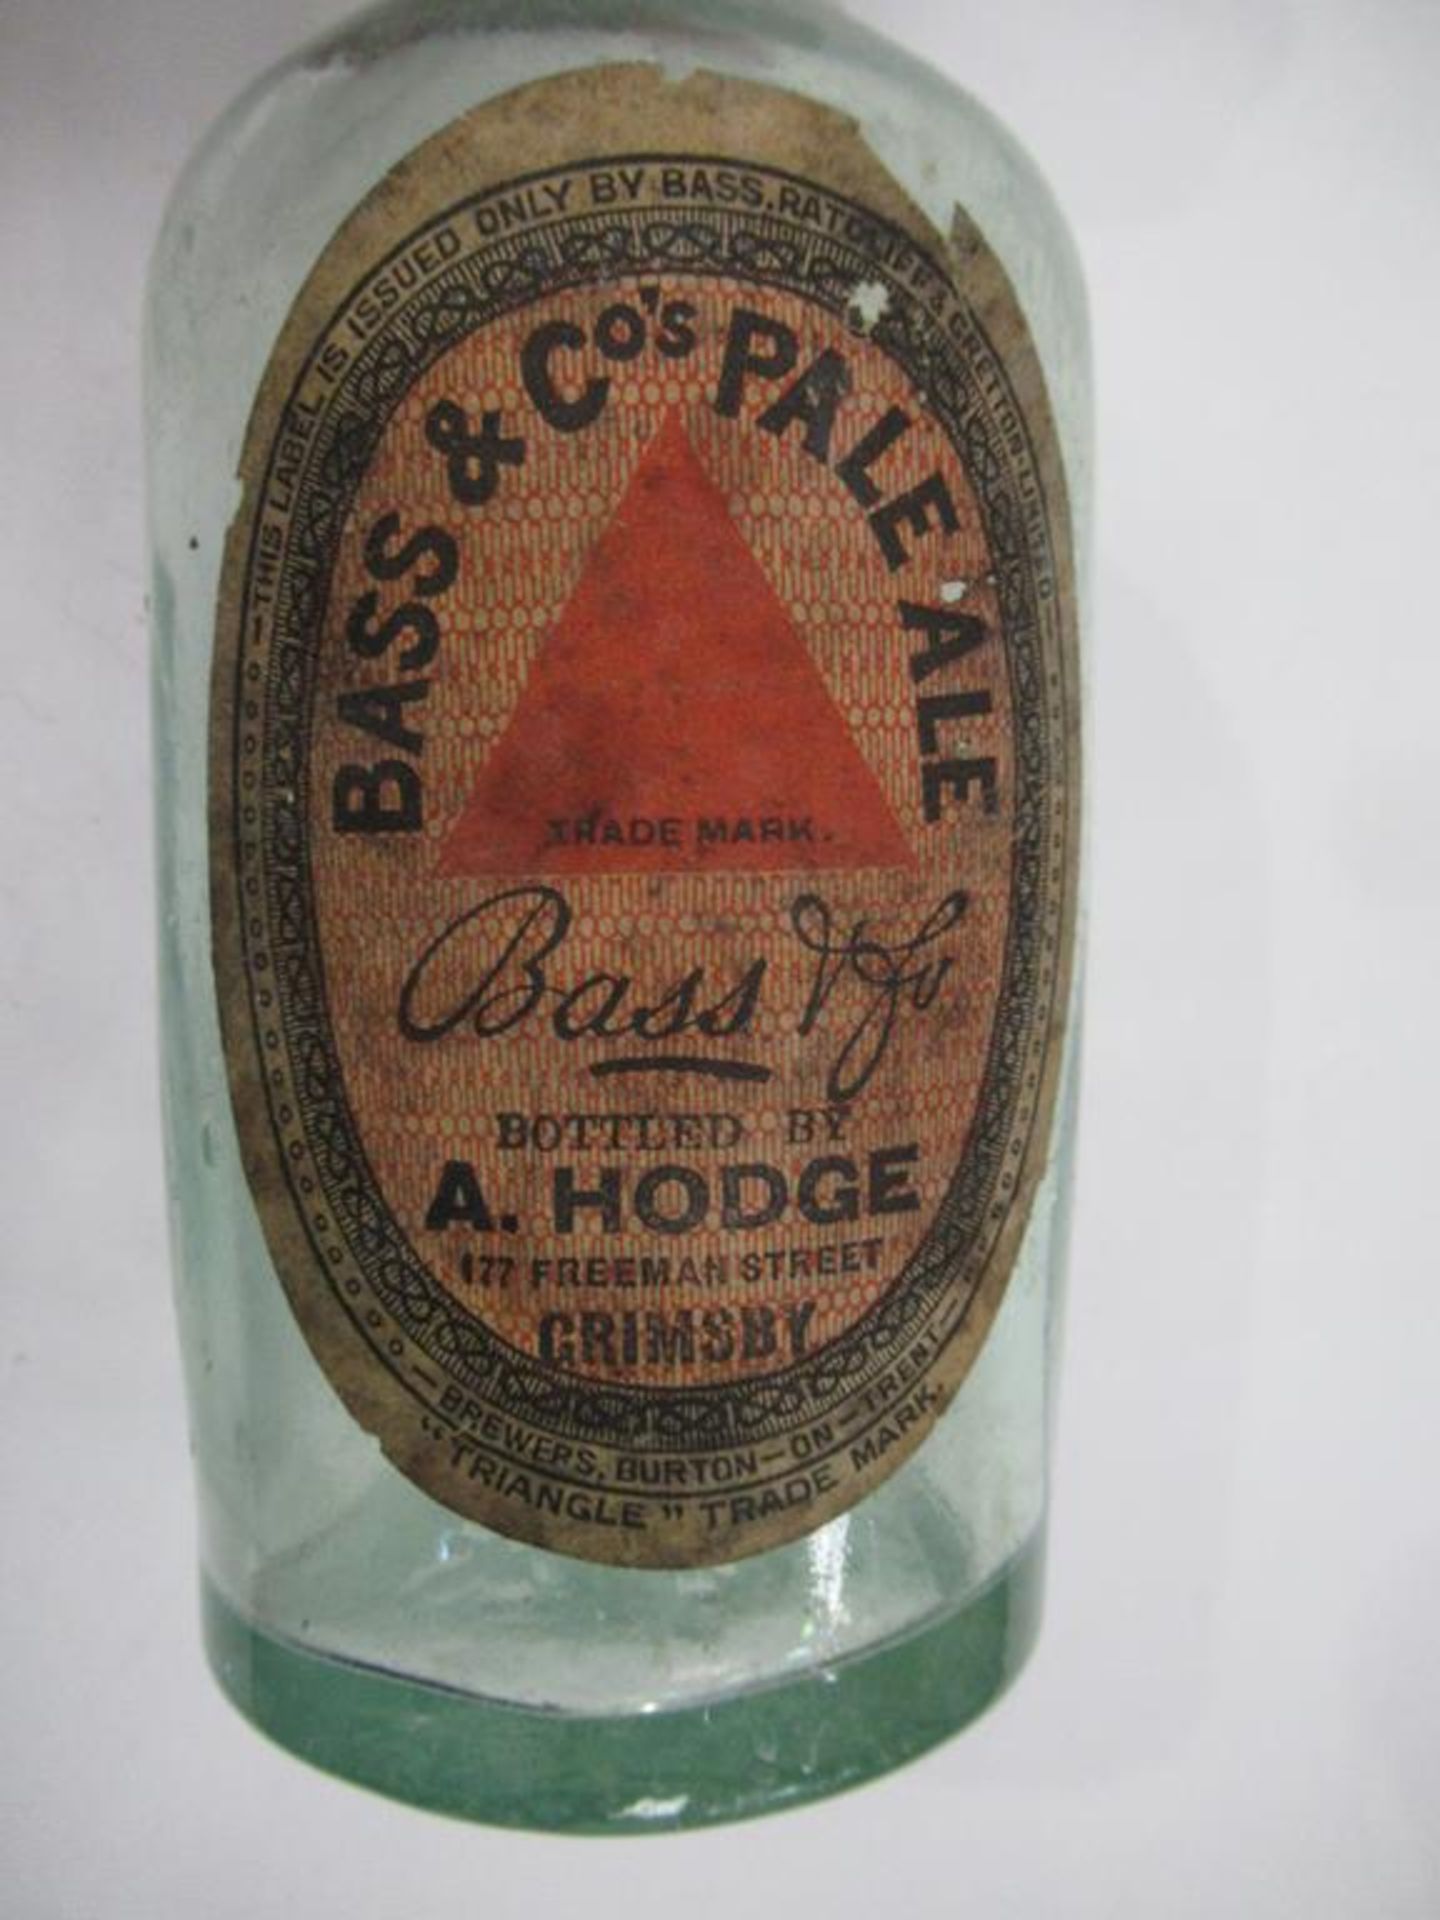 10x Grimsby A. Hodge Bottles- 2x coloured - Image 36 of 38